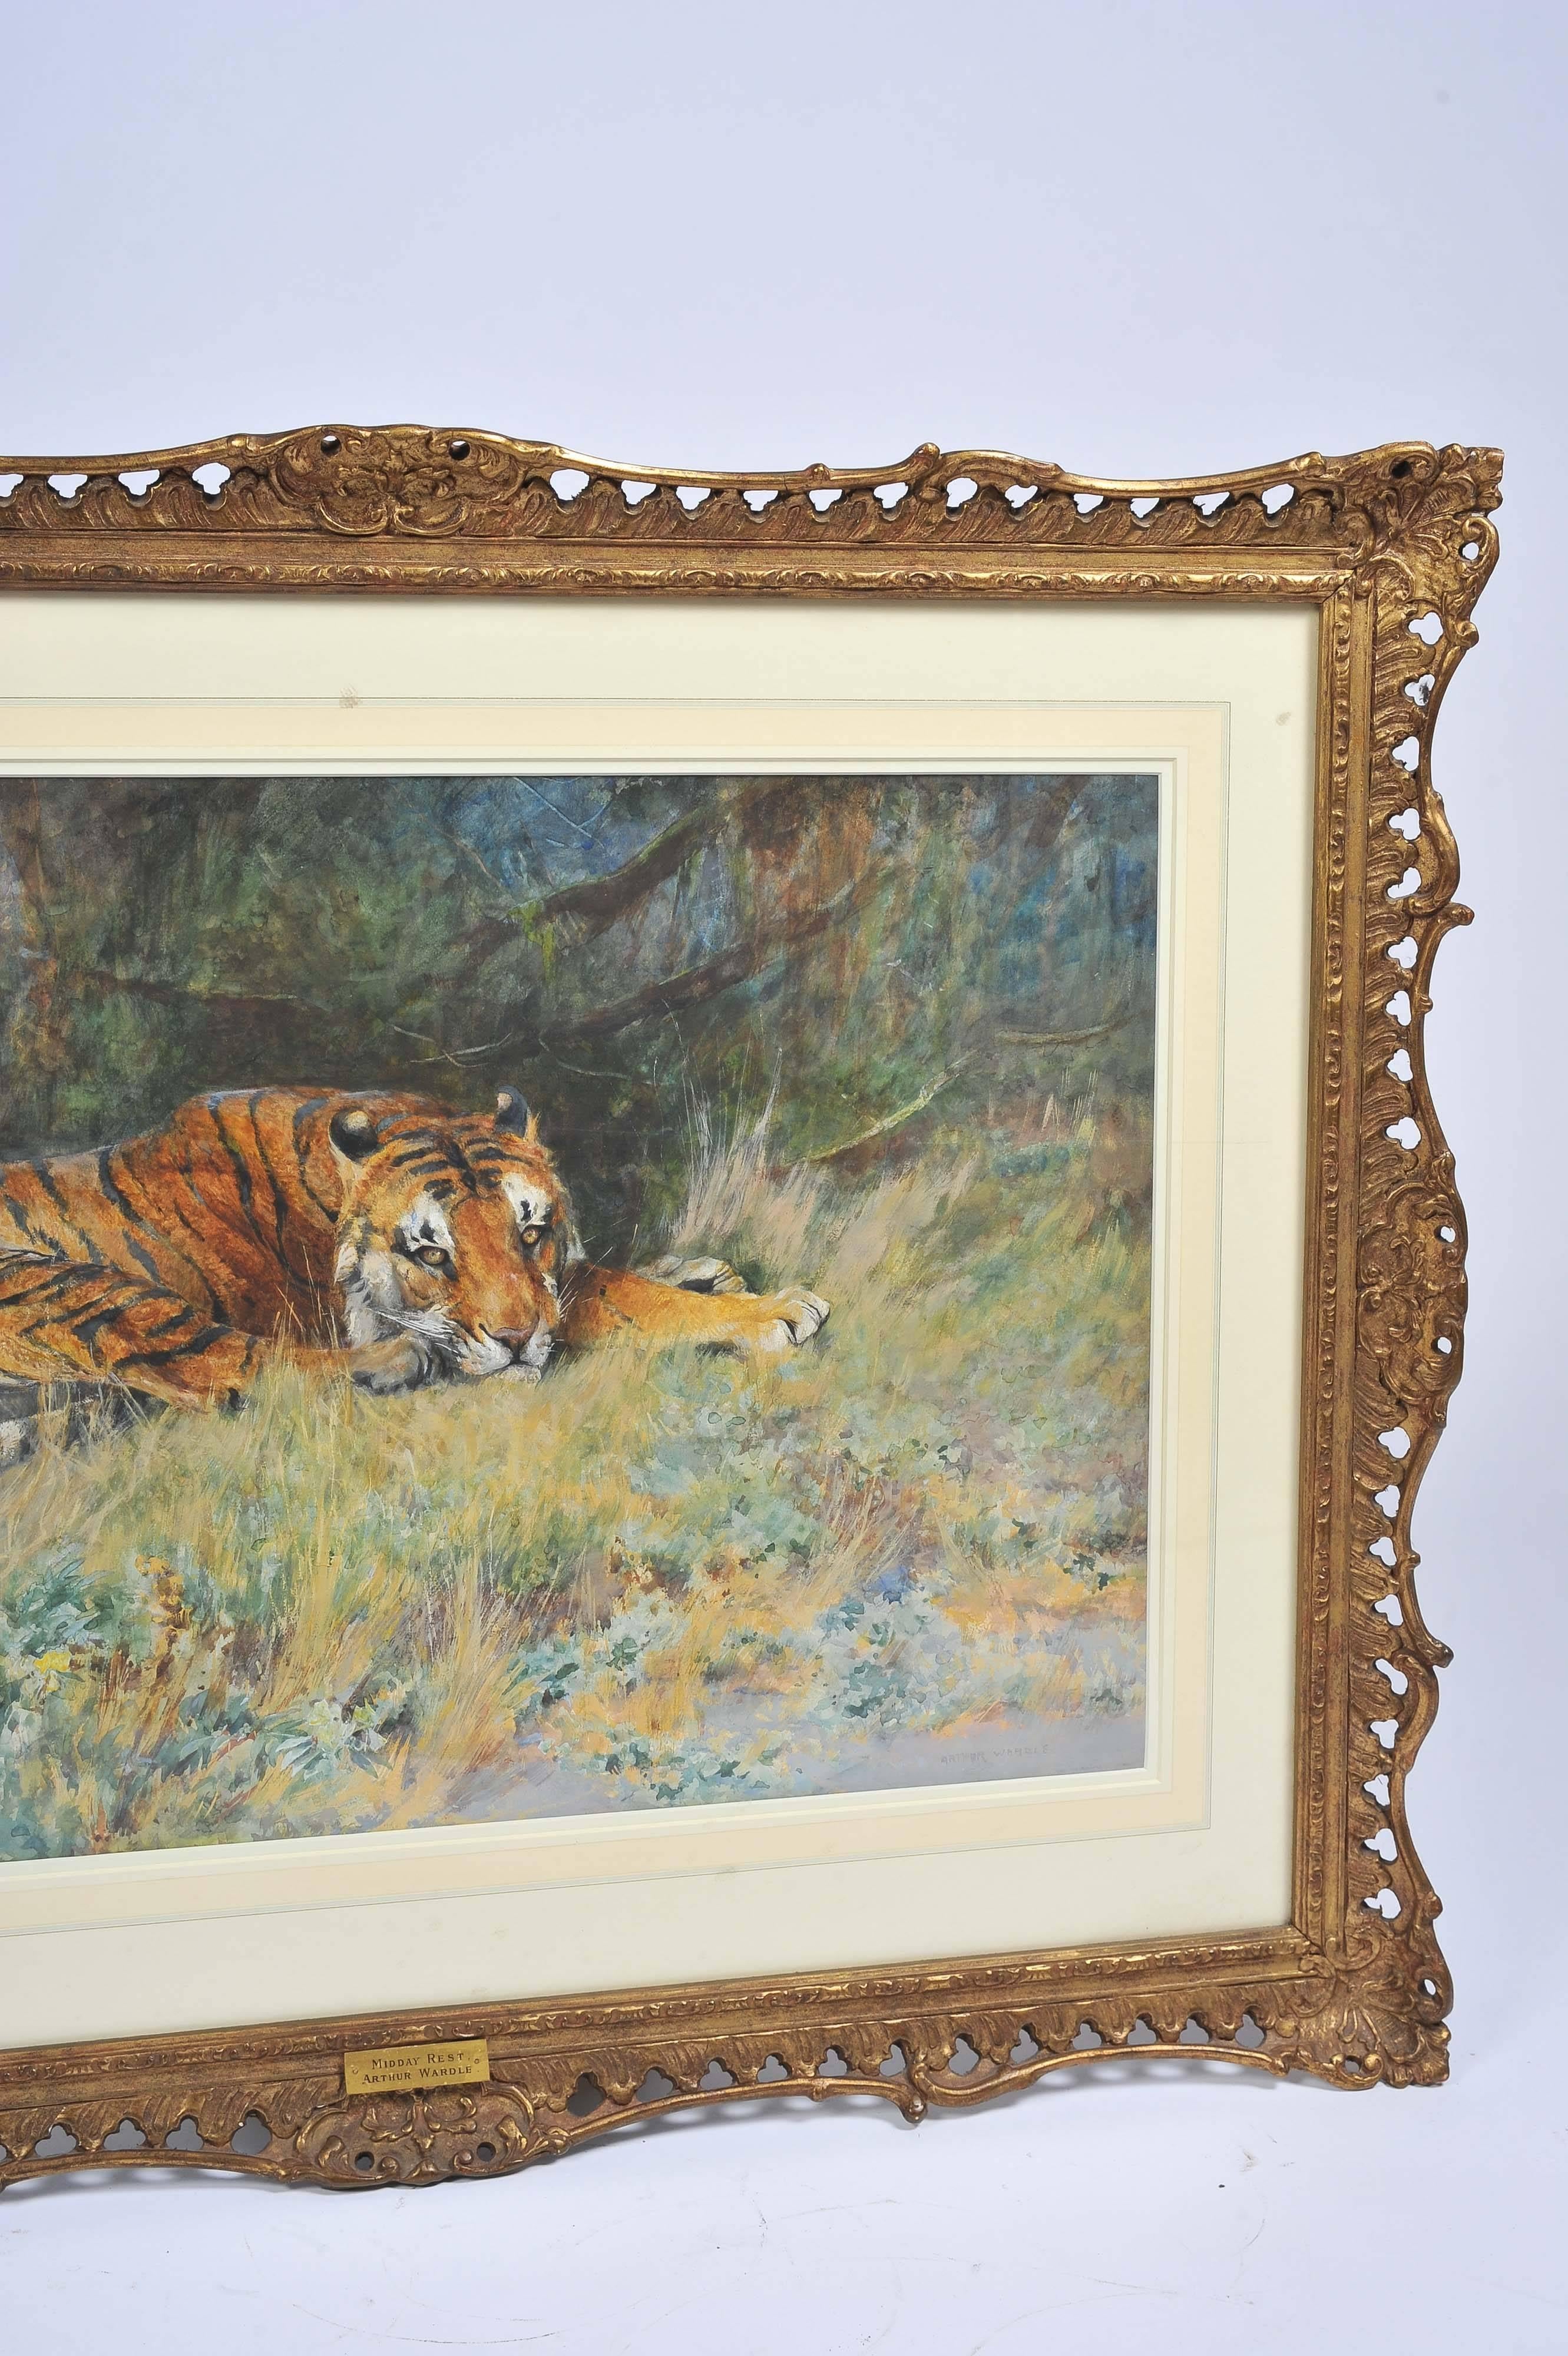 A fine quality watercolour signed Arthur Wardle, of a tiger in the bush.
Entitled; 'Midday rest' 
Mounted in a carved and gilded gesso frame.

Arthur Wardle was an English painter. Born in London, aged just 16 Wardle had a piece displayed at the